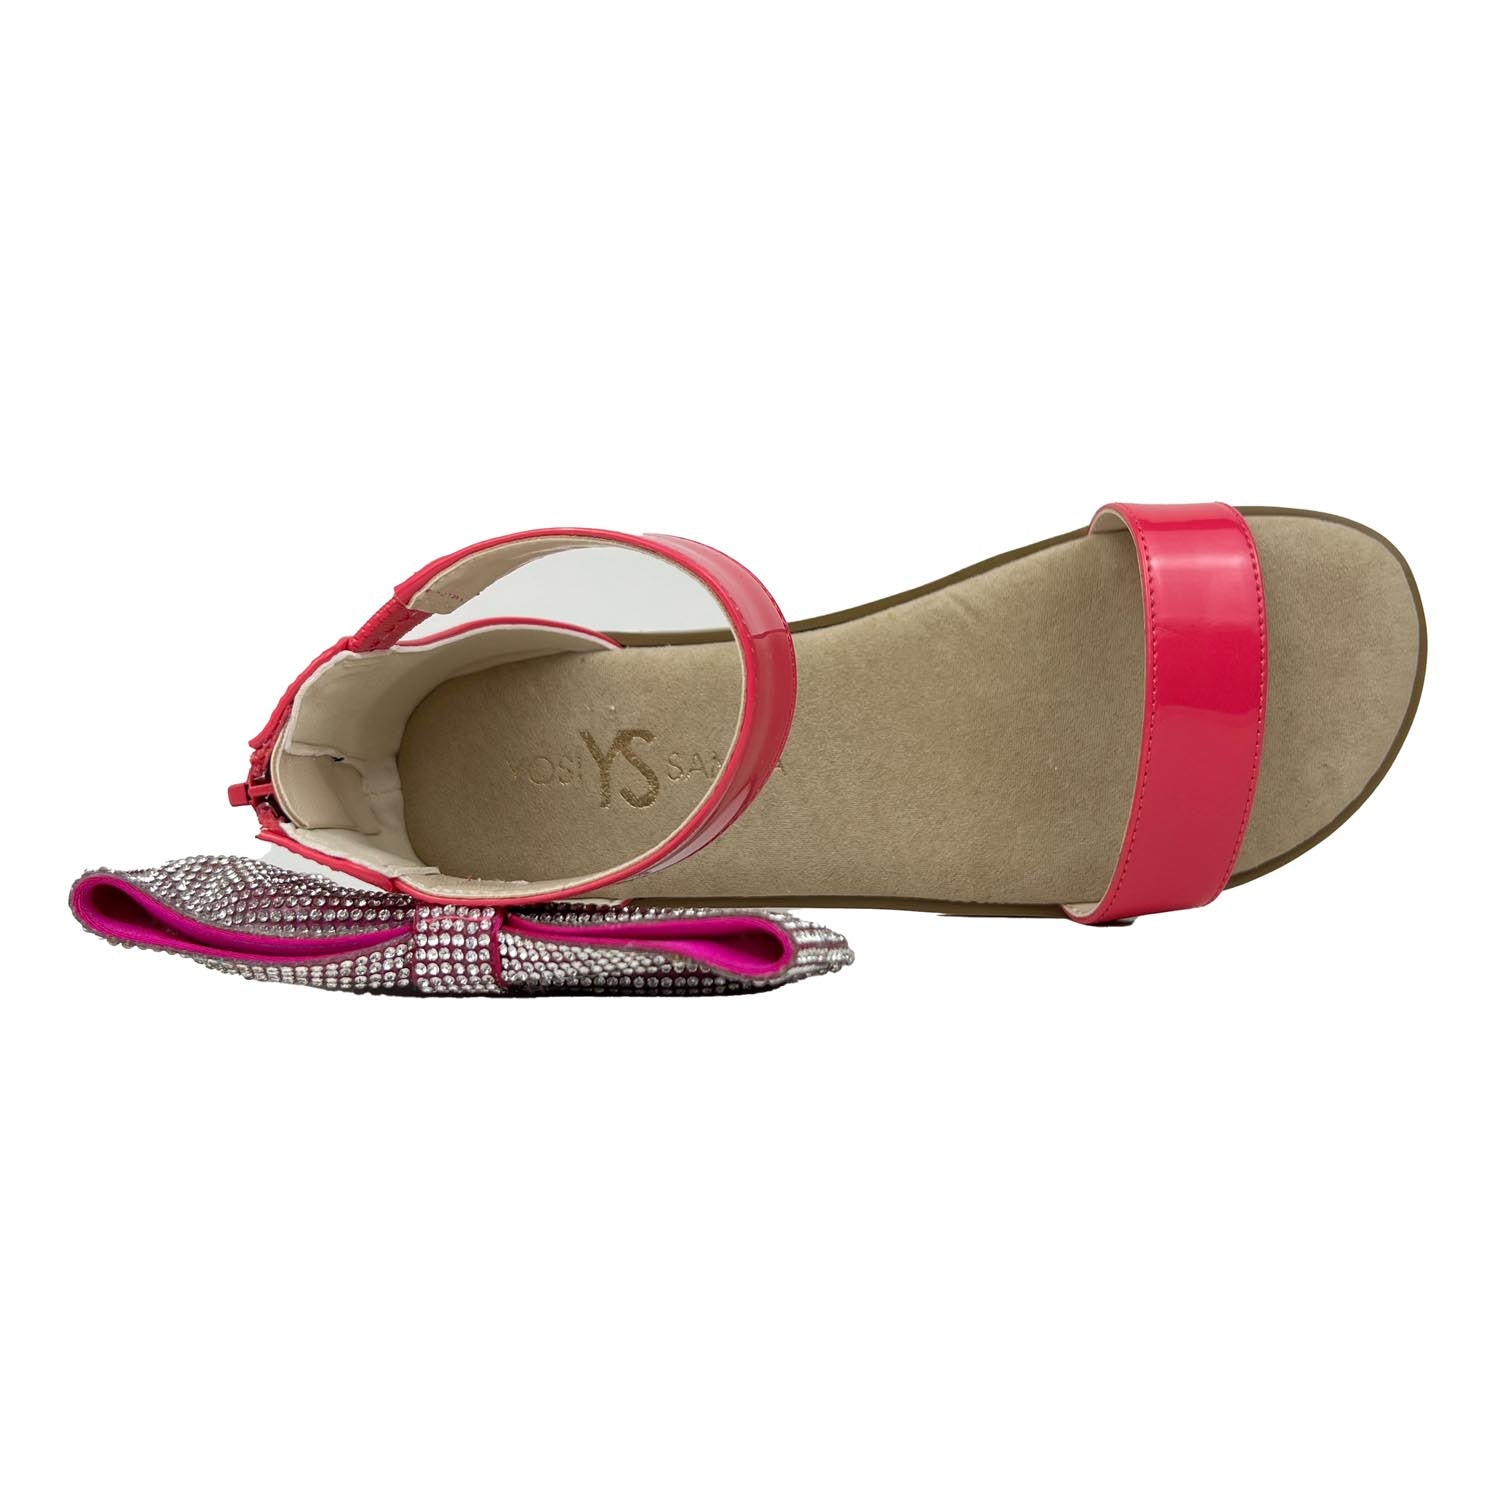 Miss Cambelle Crystal Bow Sandal in Hot Pink Patent - Kids